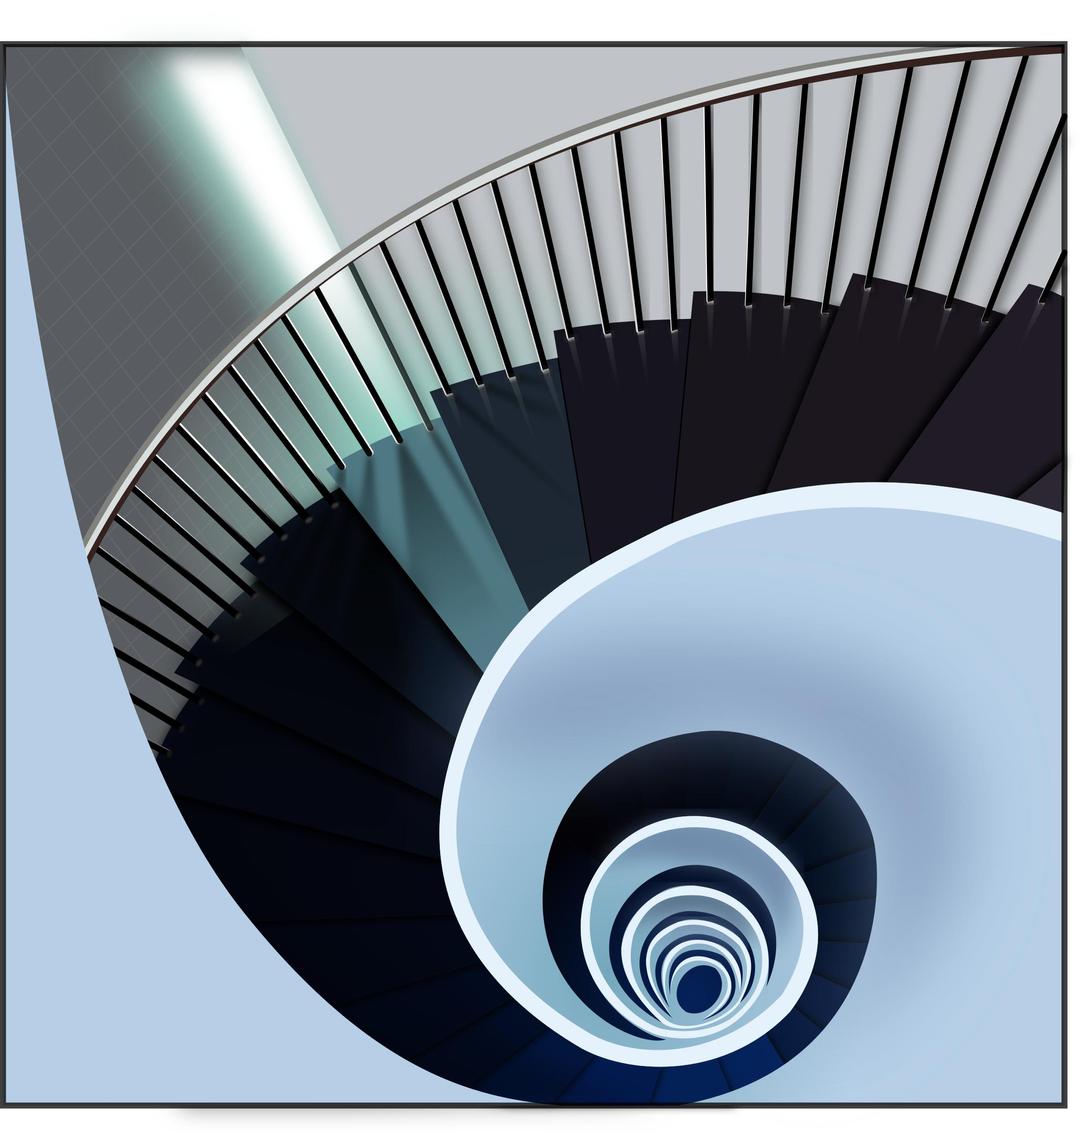 hellicoidal stairs png transparent